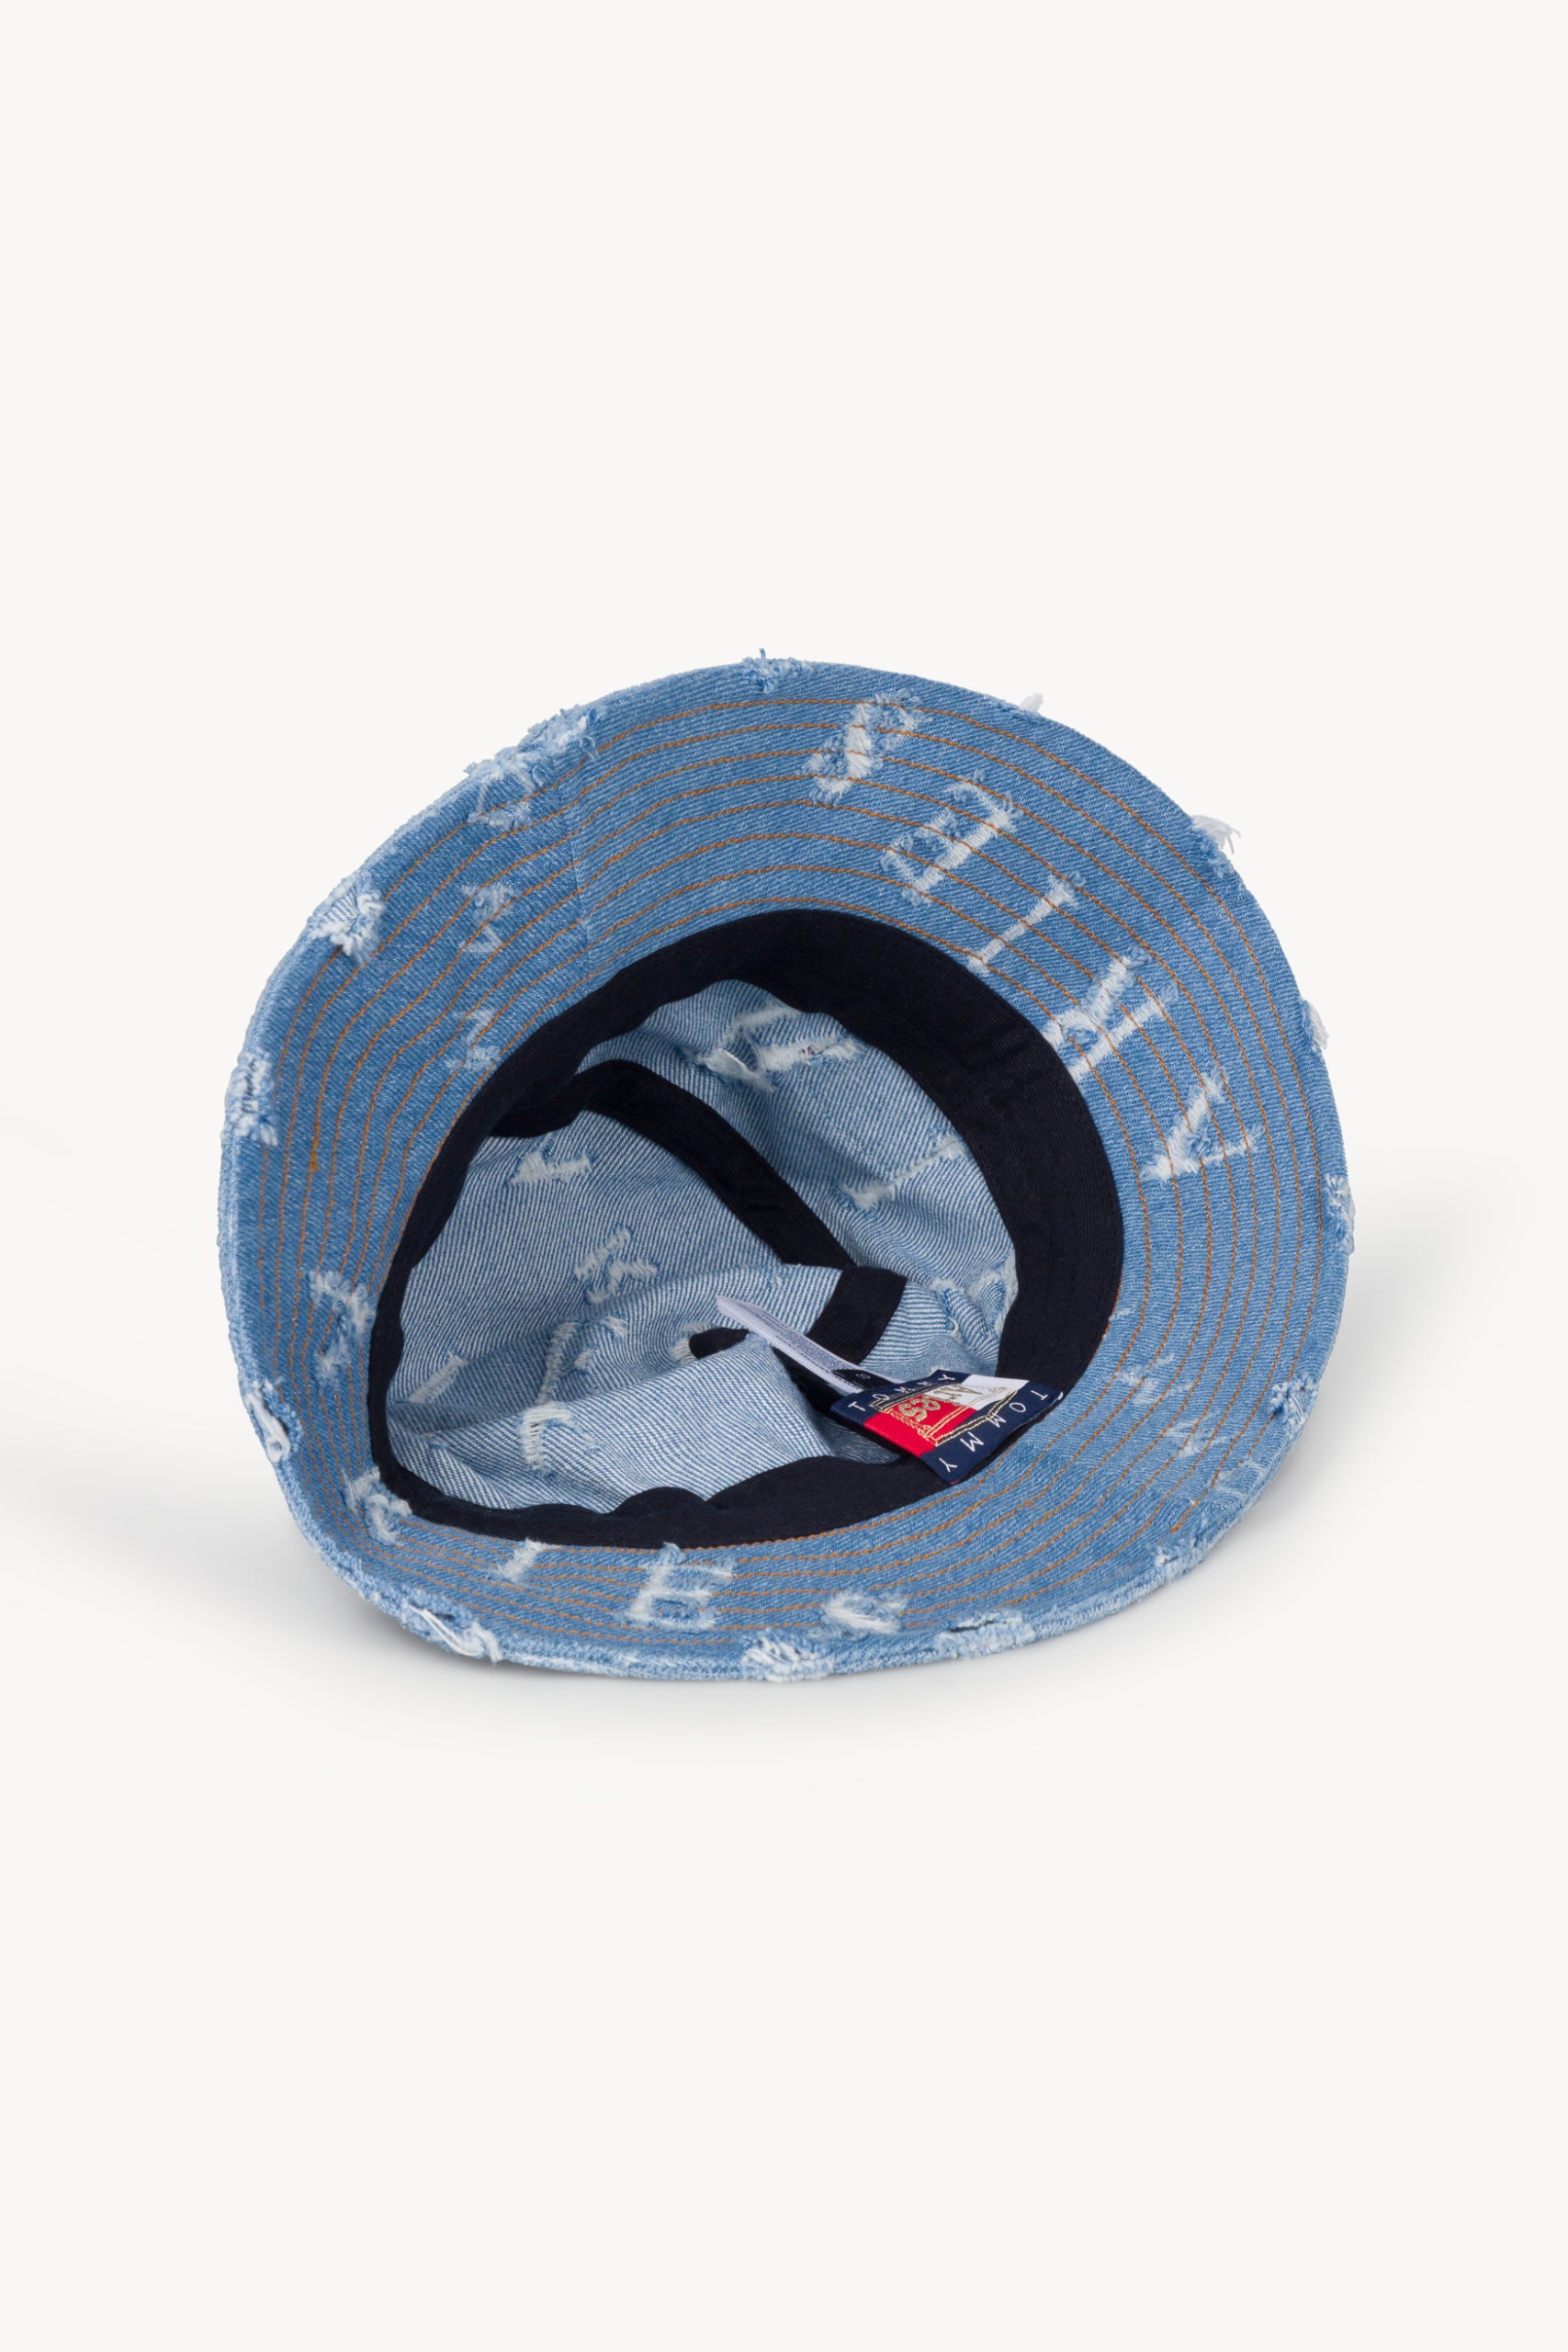 Load image into Gallery viewer, Tommy x Aries Logo Destroyed Denim Hat